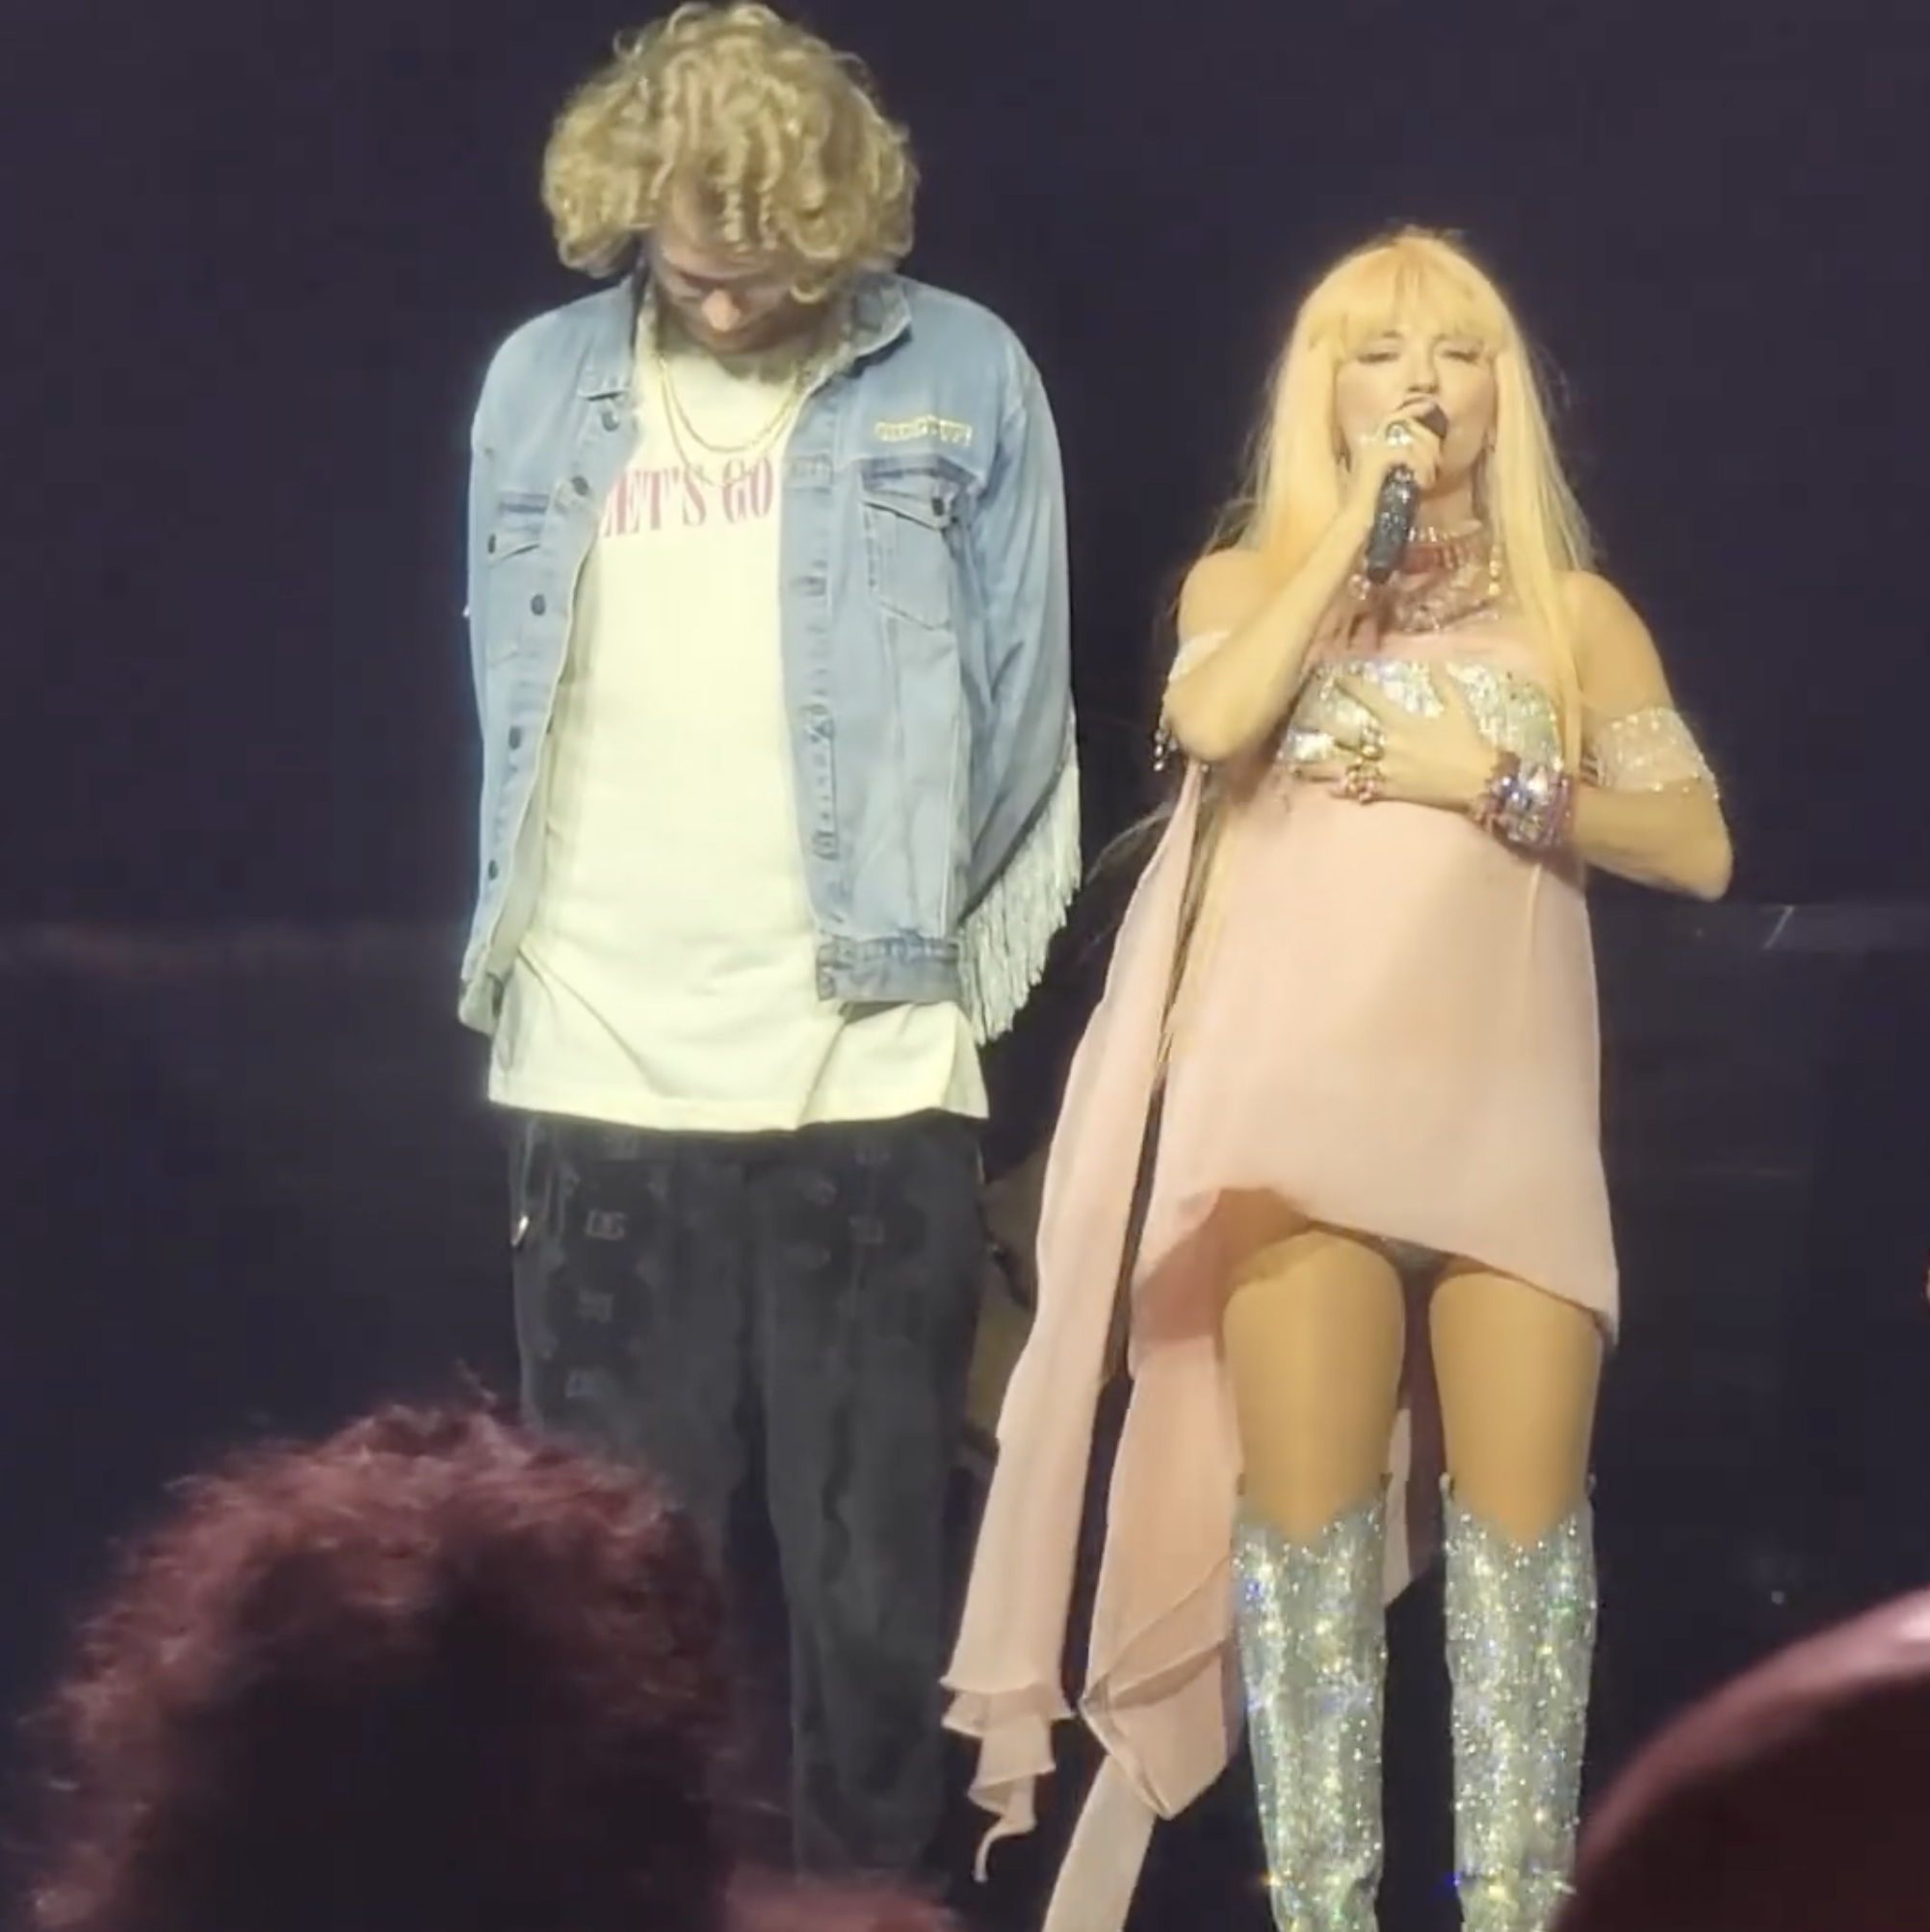 The country singer wore a small pink dress with sparkly cowboy boots while on stage with Yung Gravy this week